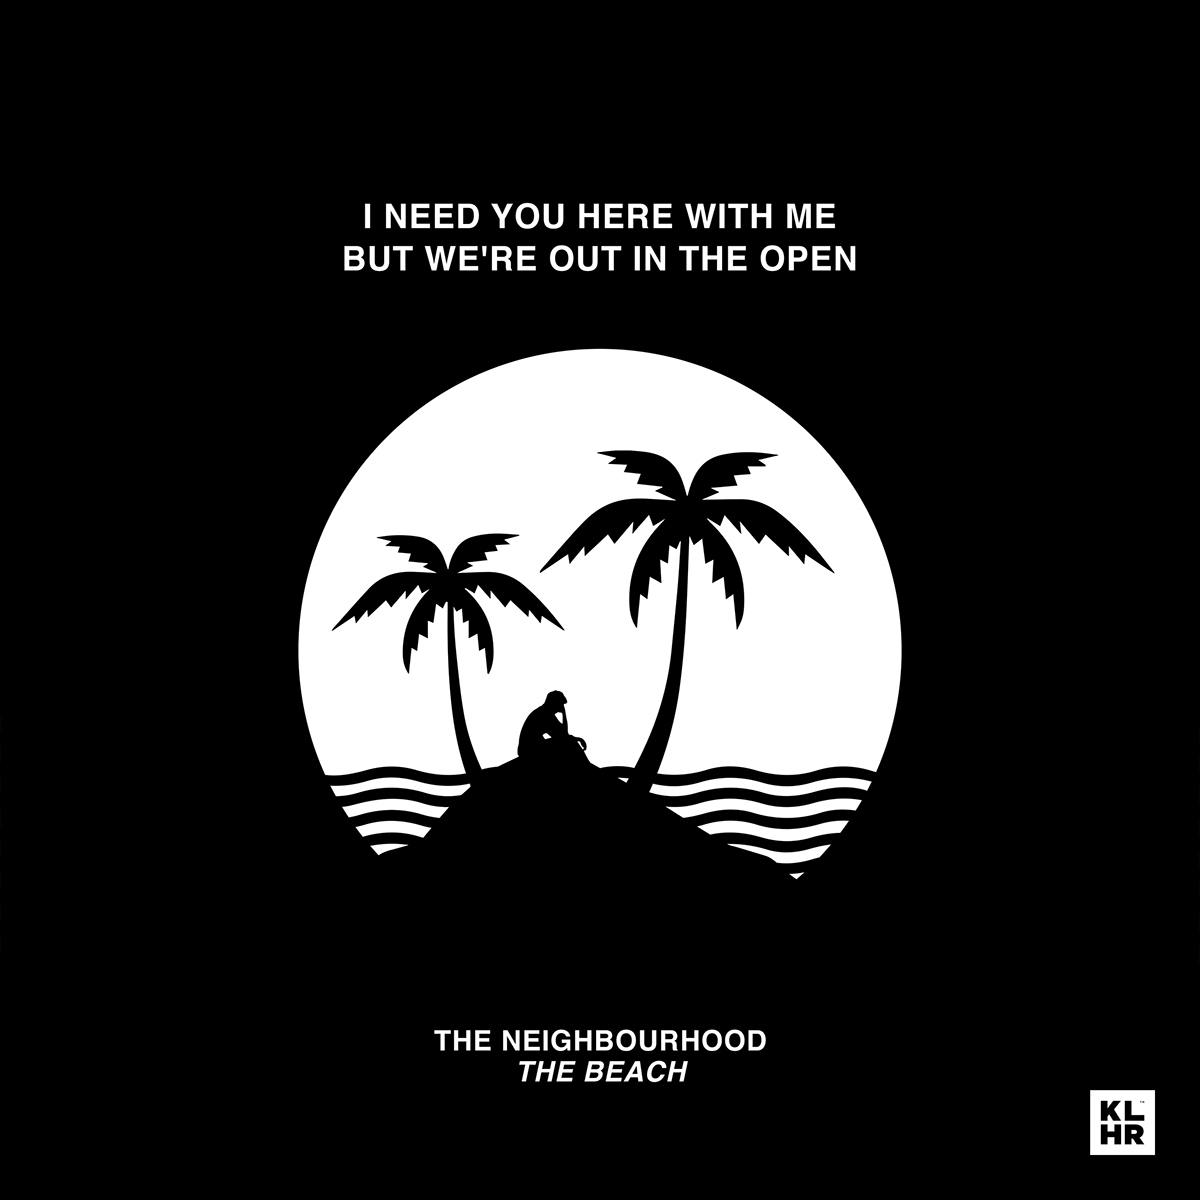 The NBHD the neighbourhood Album music graphic design design Wiped Out indi...